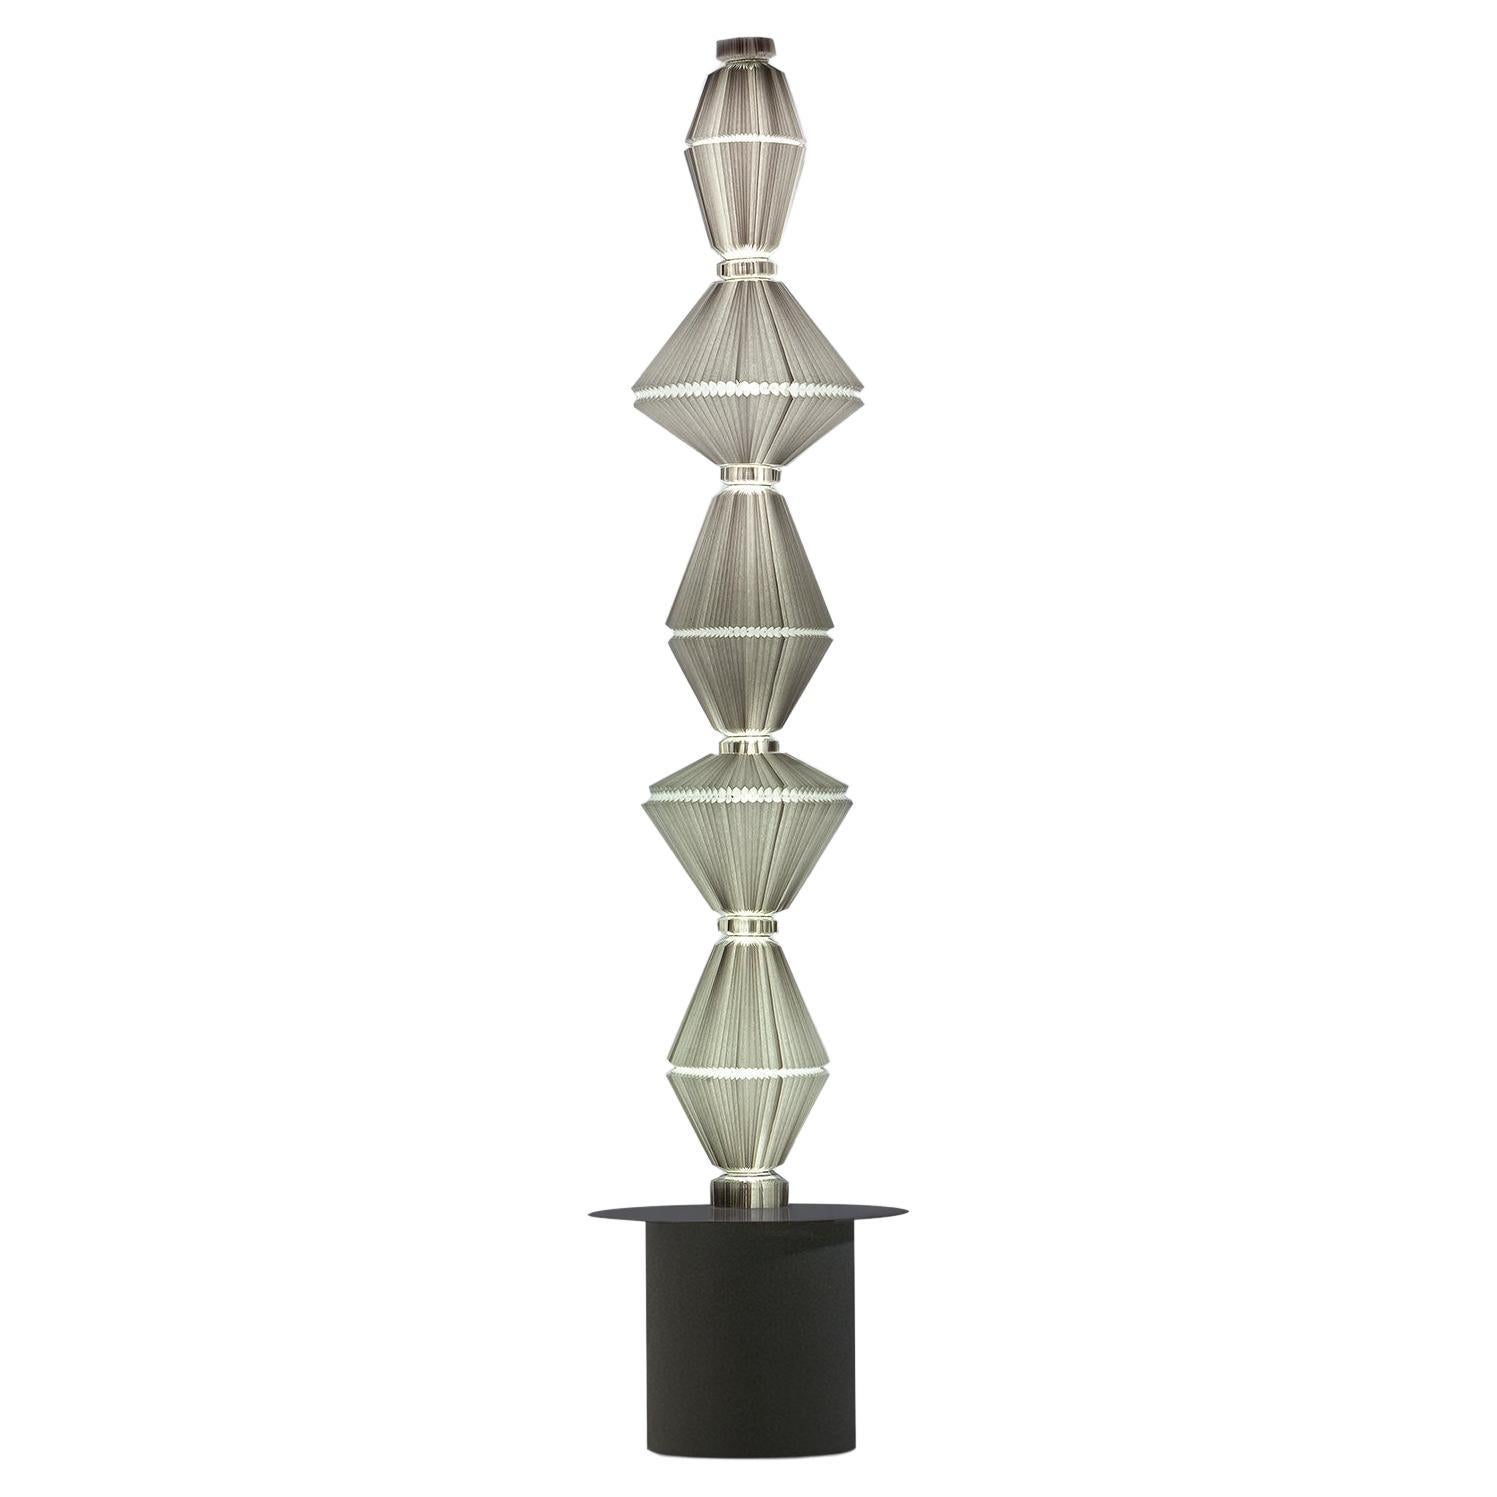 Oiphorique P PE Floor Lamp in Textile and Steel by Atelier Oi for Parachilna For Sale